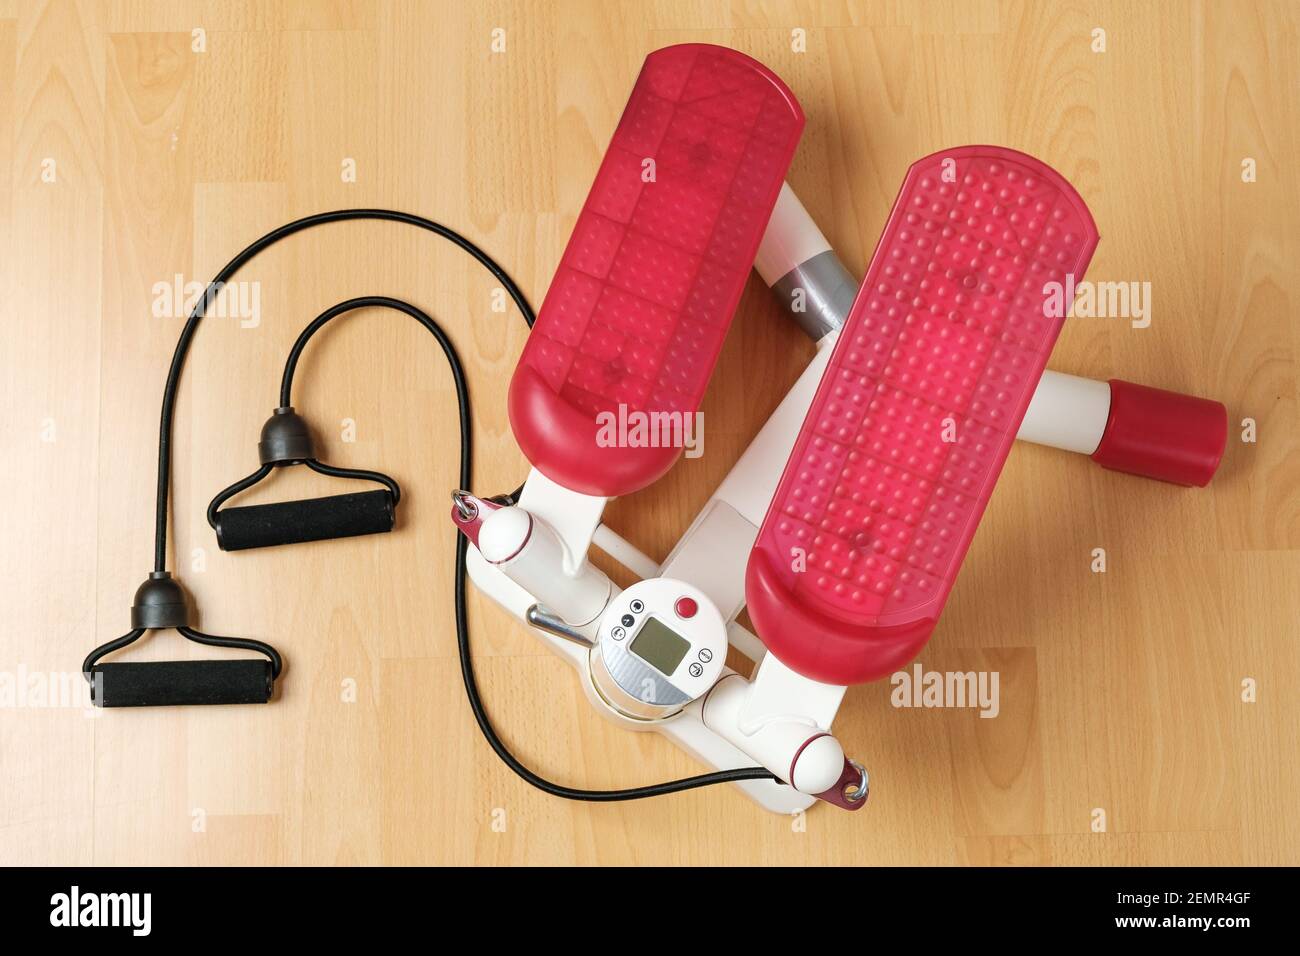 Fitness stepper or cardio training with digital display on the floor. Workout at home during pandemic and quarantine. Keep fit. Home gym equipment Stock Photo